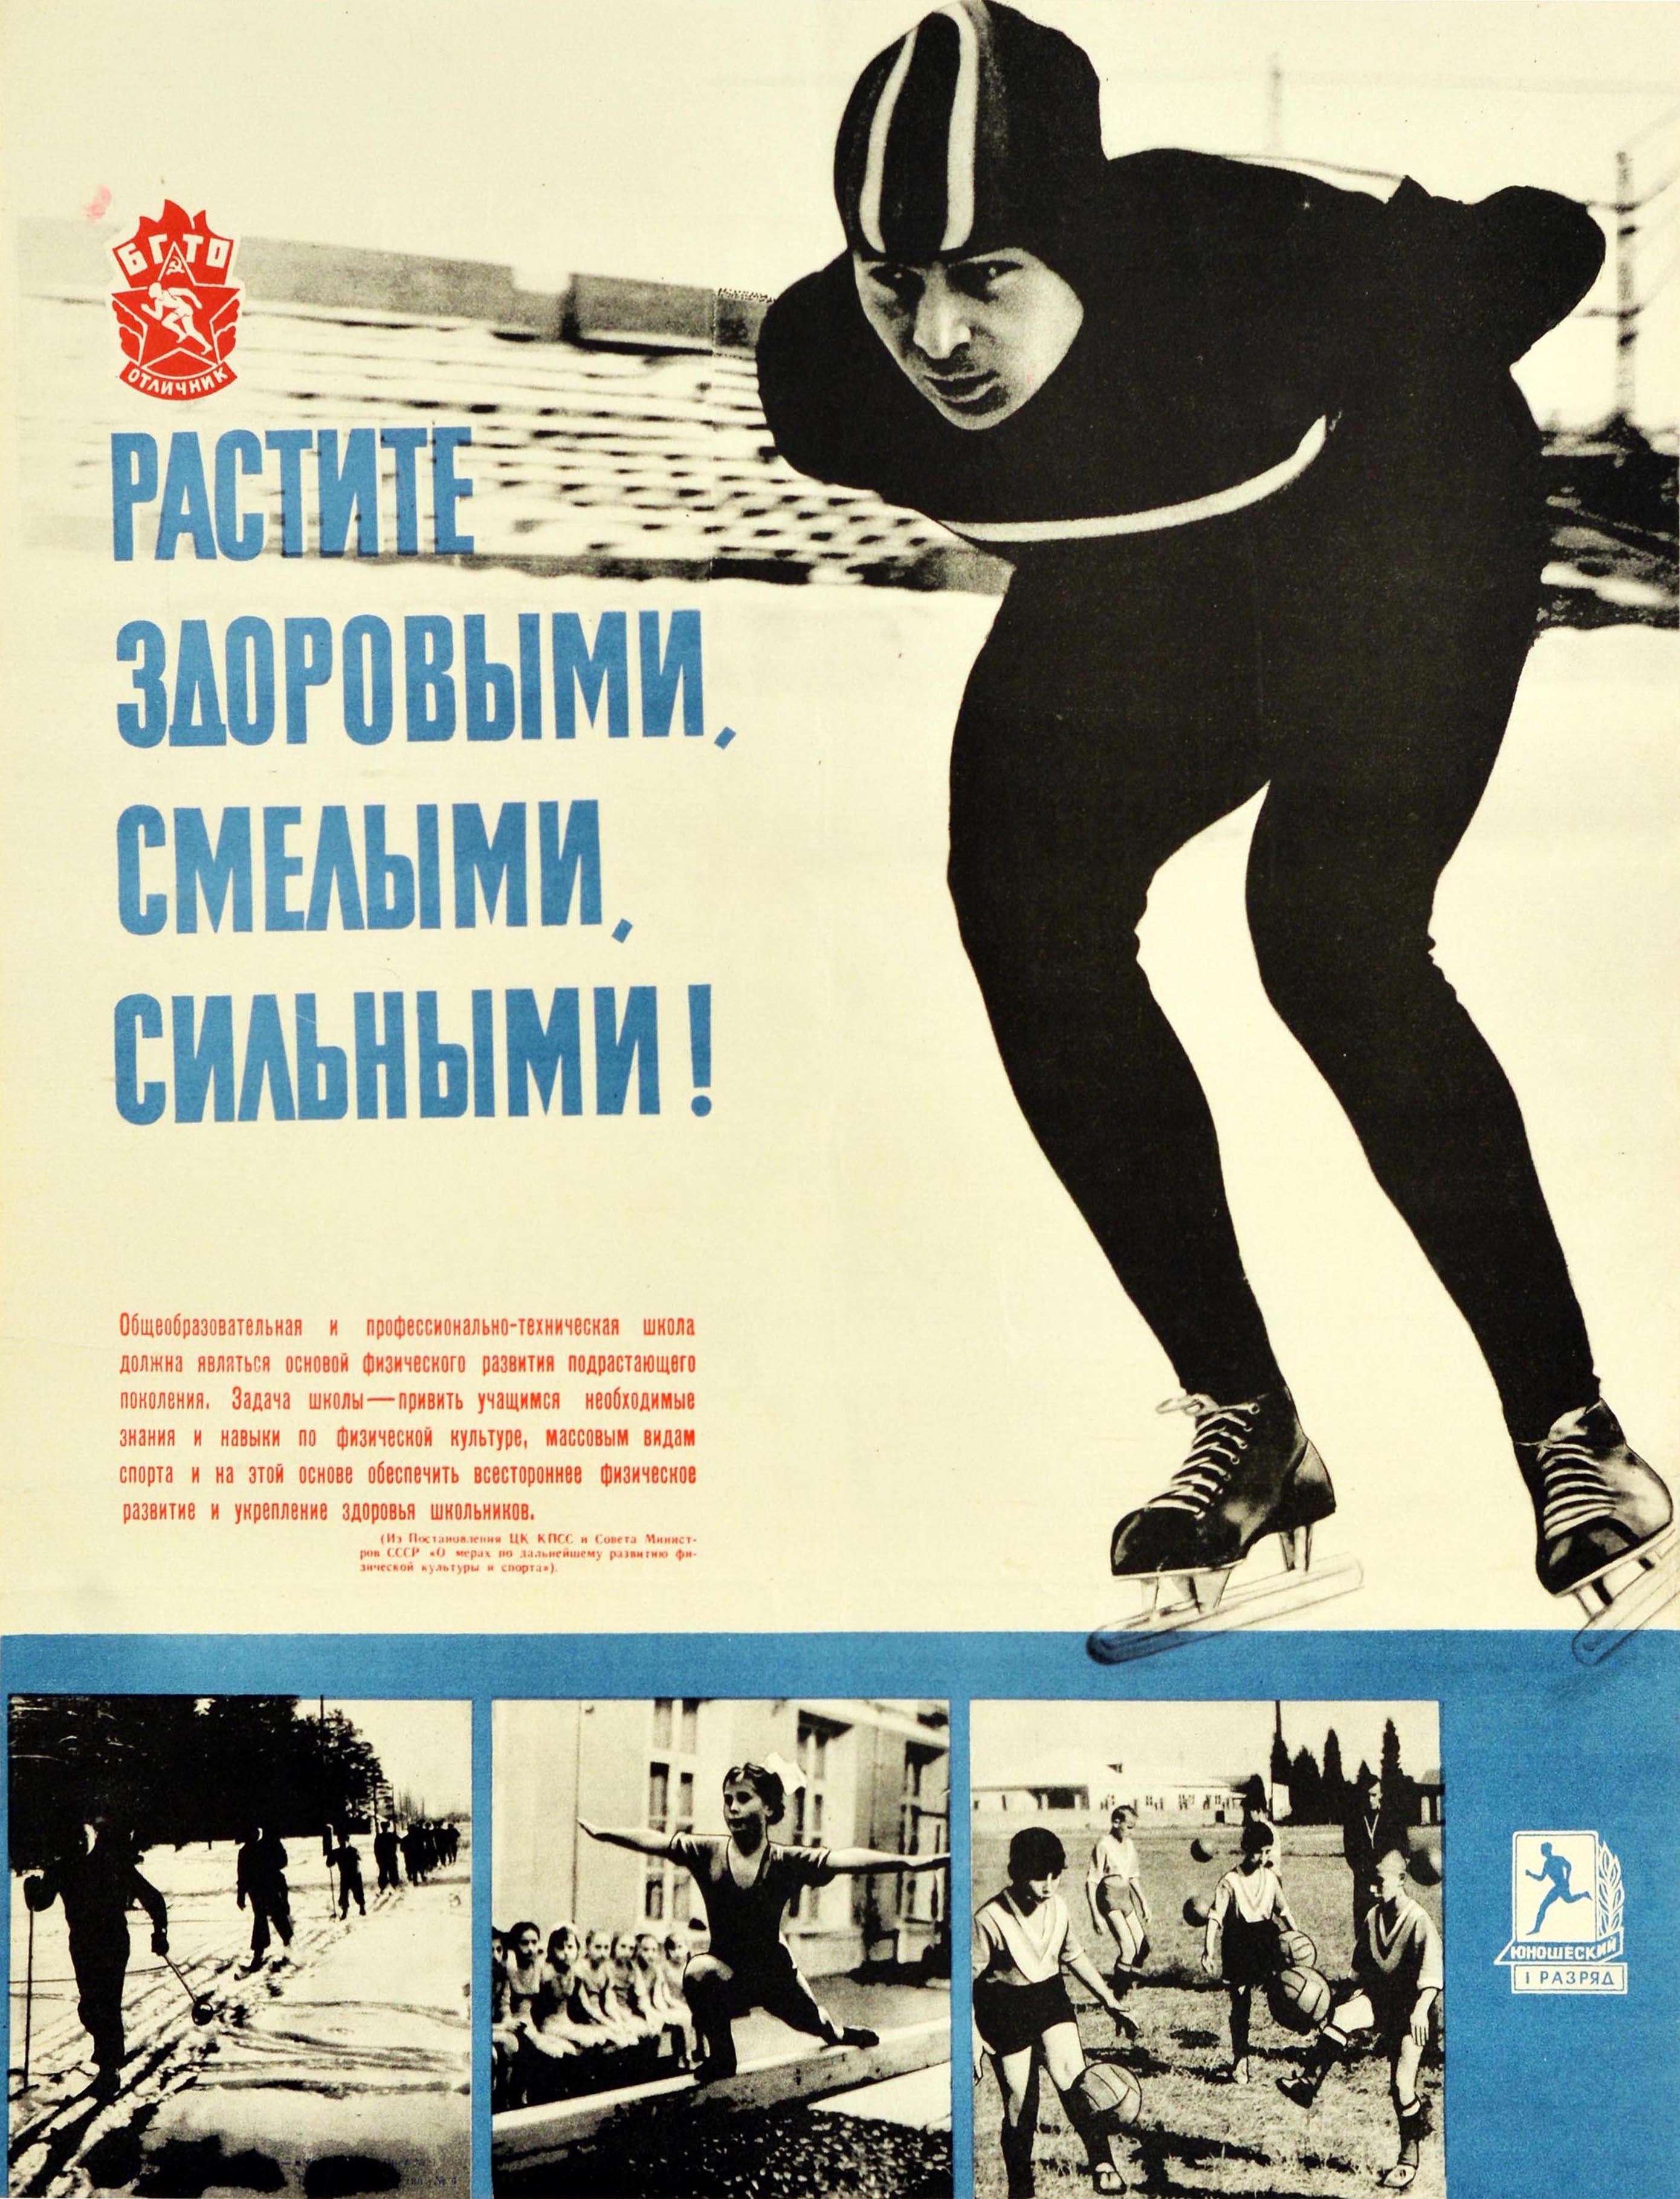 Original vintage Soviet propaganda poster promoting sport issued by the All-Union Physical Culture Training Programme - Ready for Labour and Defence of the USSR Grow Healthy, Brave, Strong! Design features a photograph of a speed skater in a black